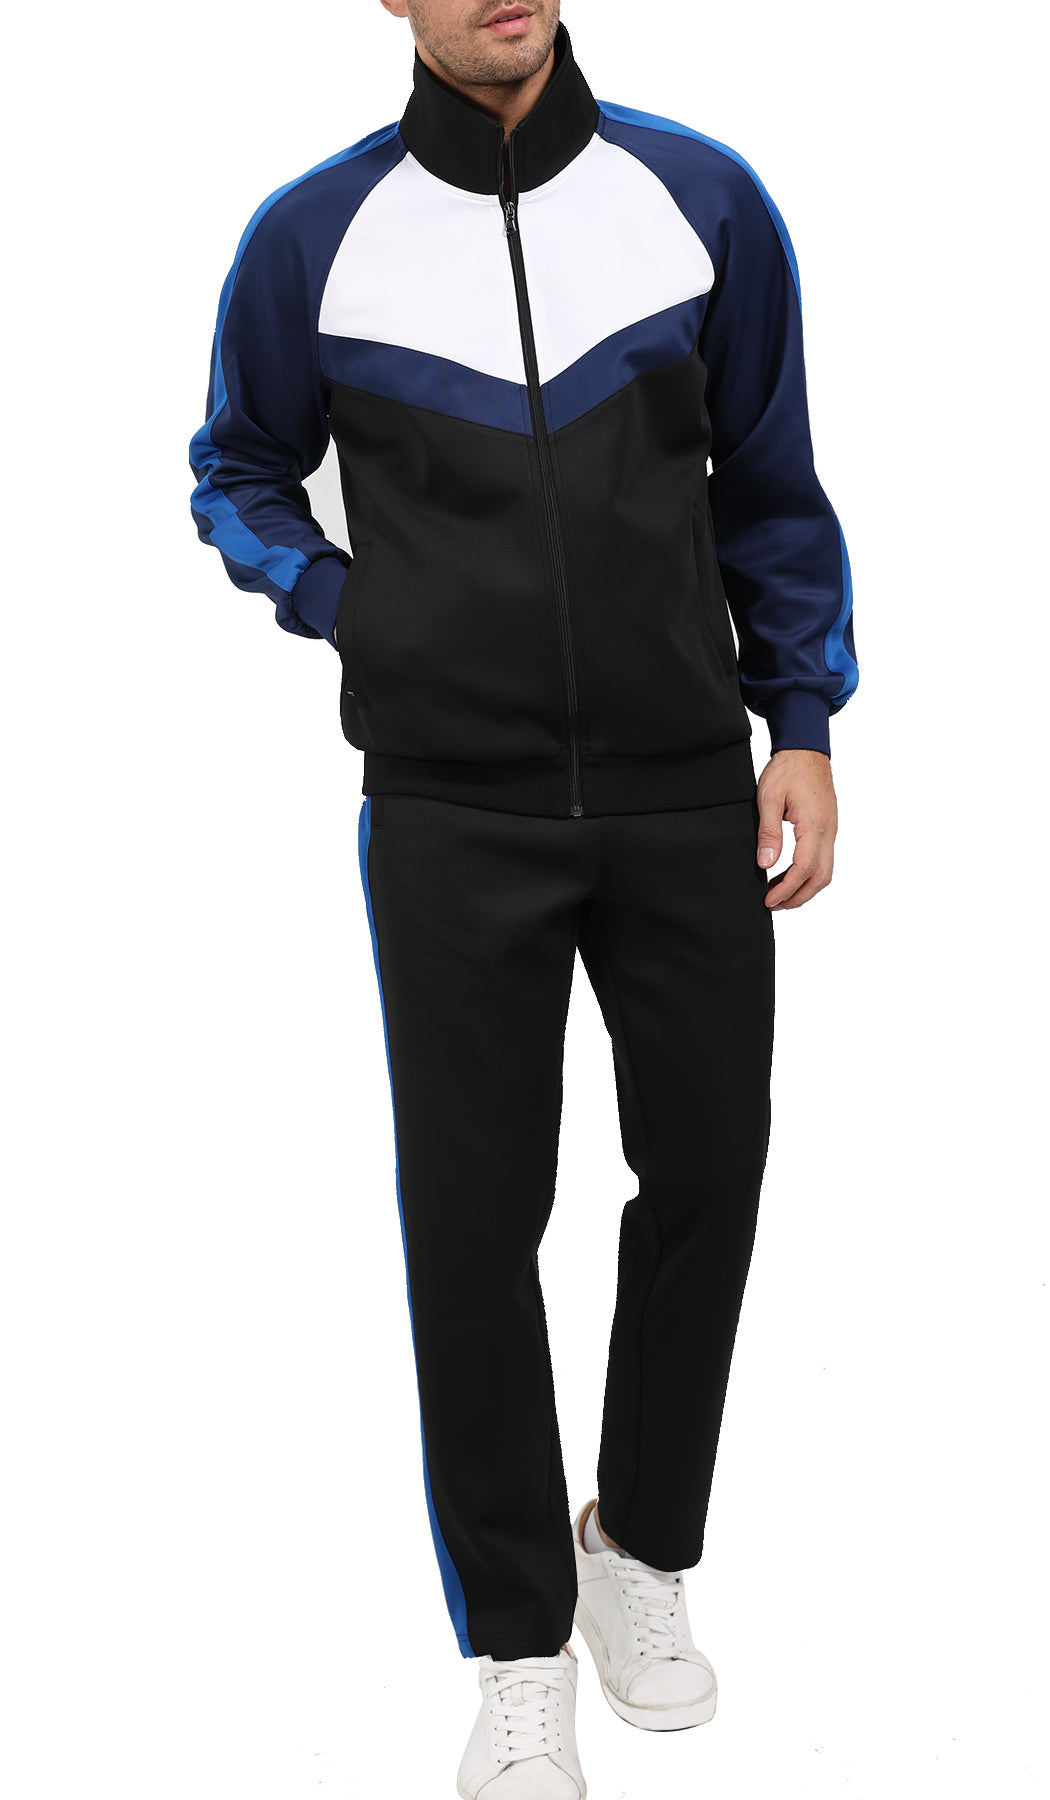 Men's Tracksuits Set 2 Piece Athletic Full Zip Track Suits Workout